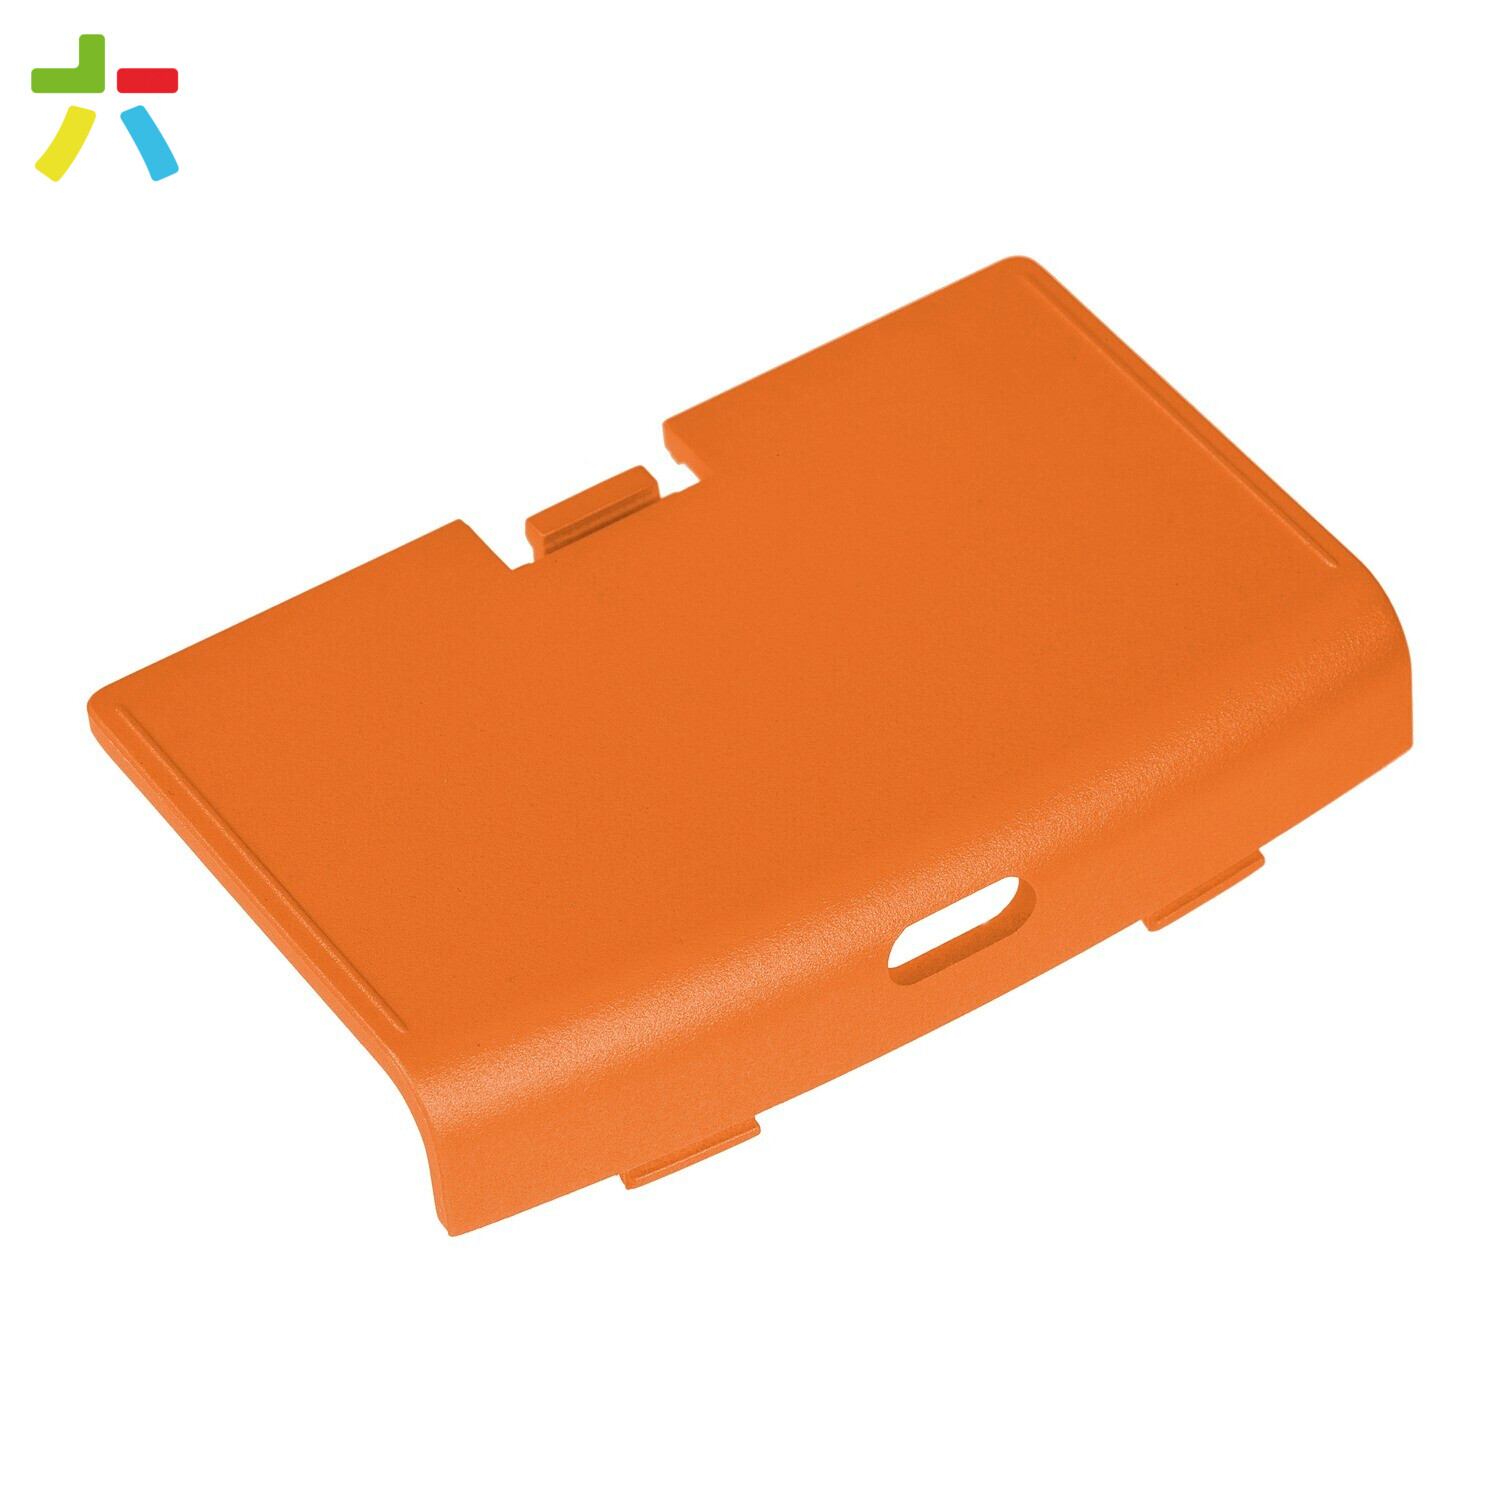 Game Boy Advance USB-C Battery Cover (Pearl Orange - Soft Touch)